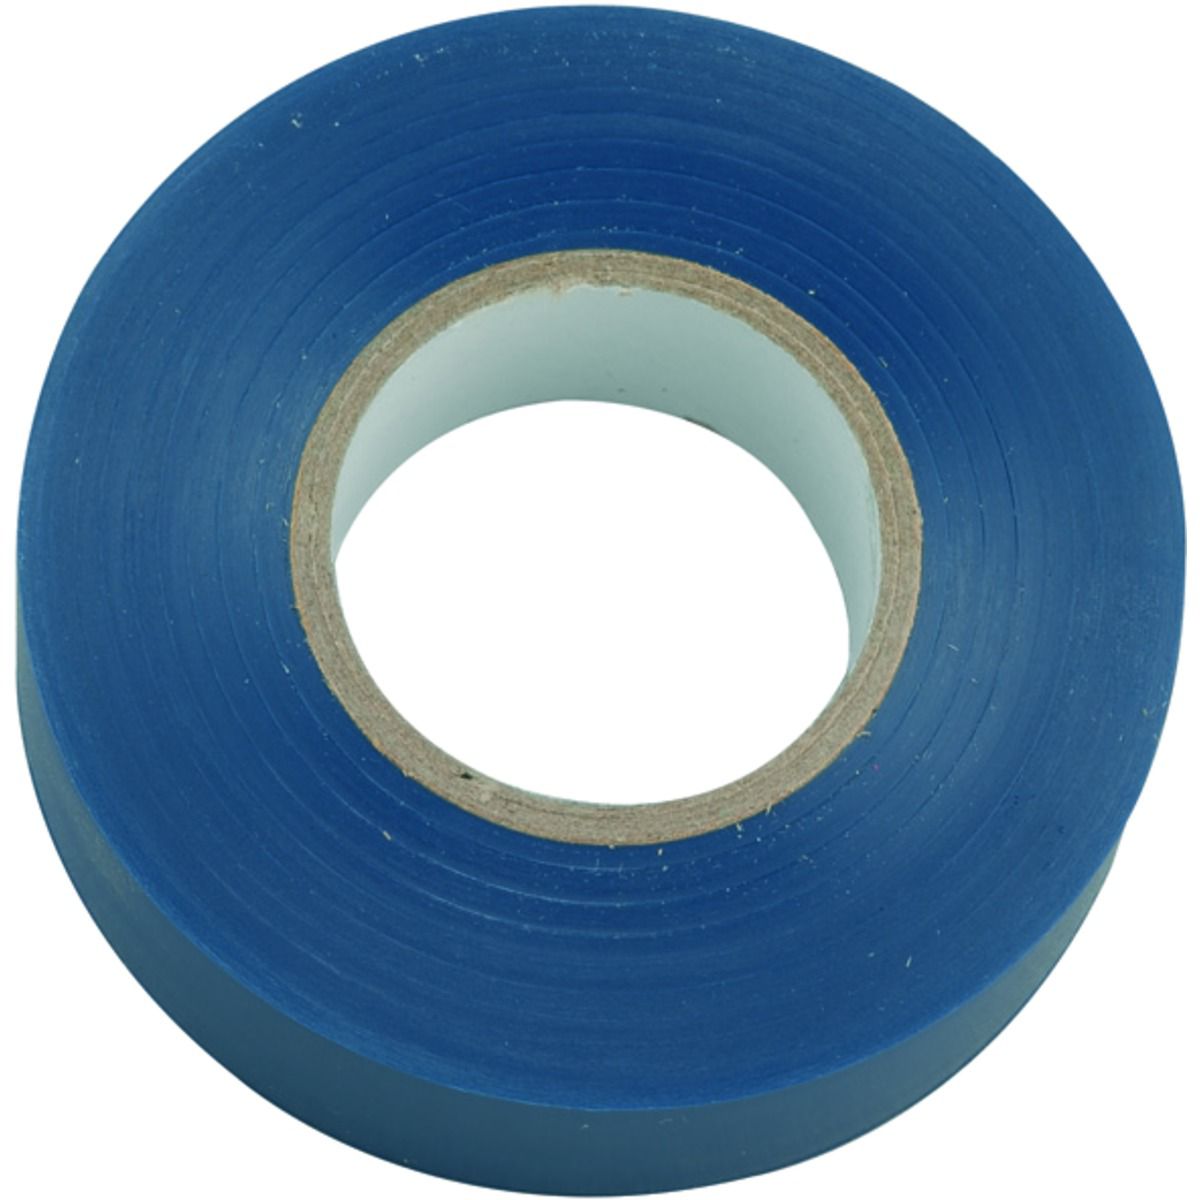 Image of Deta Blue PVC Electrical Insulation Tape - 20m x 19mm - Pack of 10